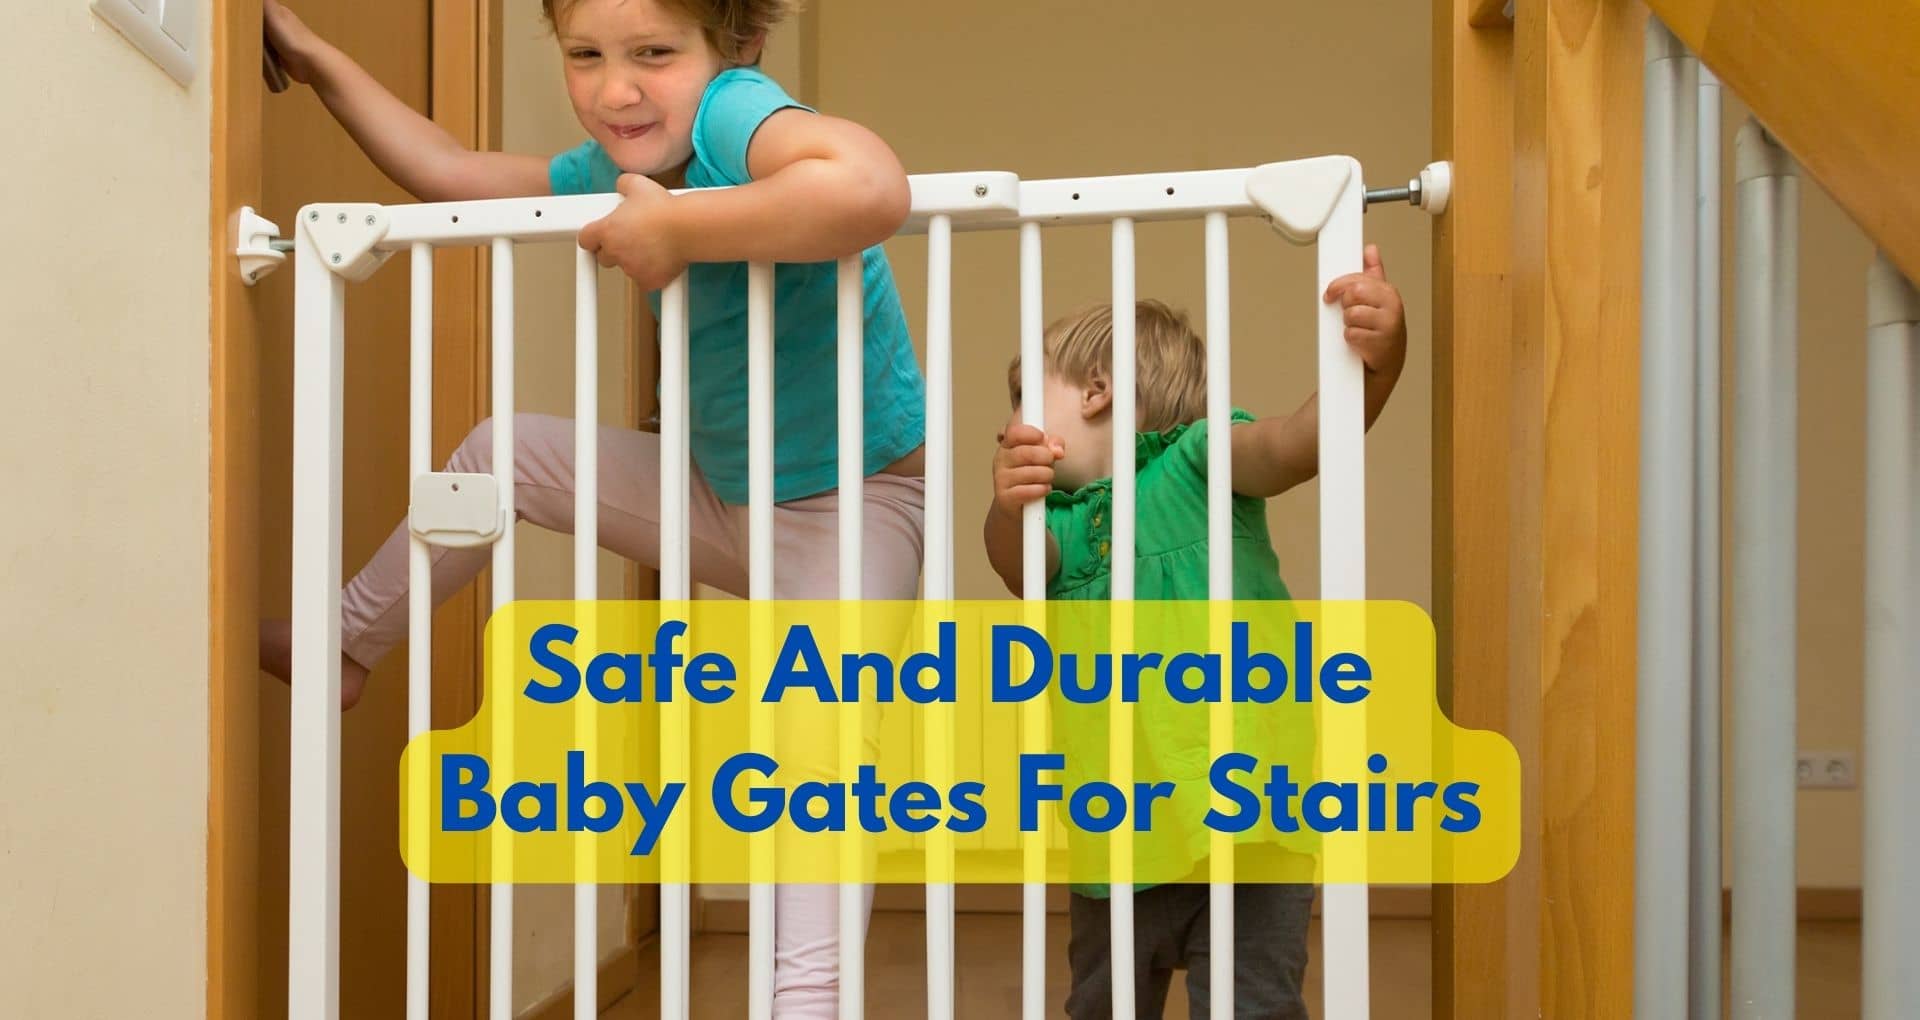 How Do I Choose Safe Baby Gate For Stairs?